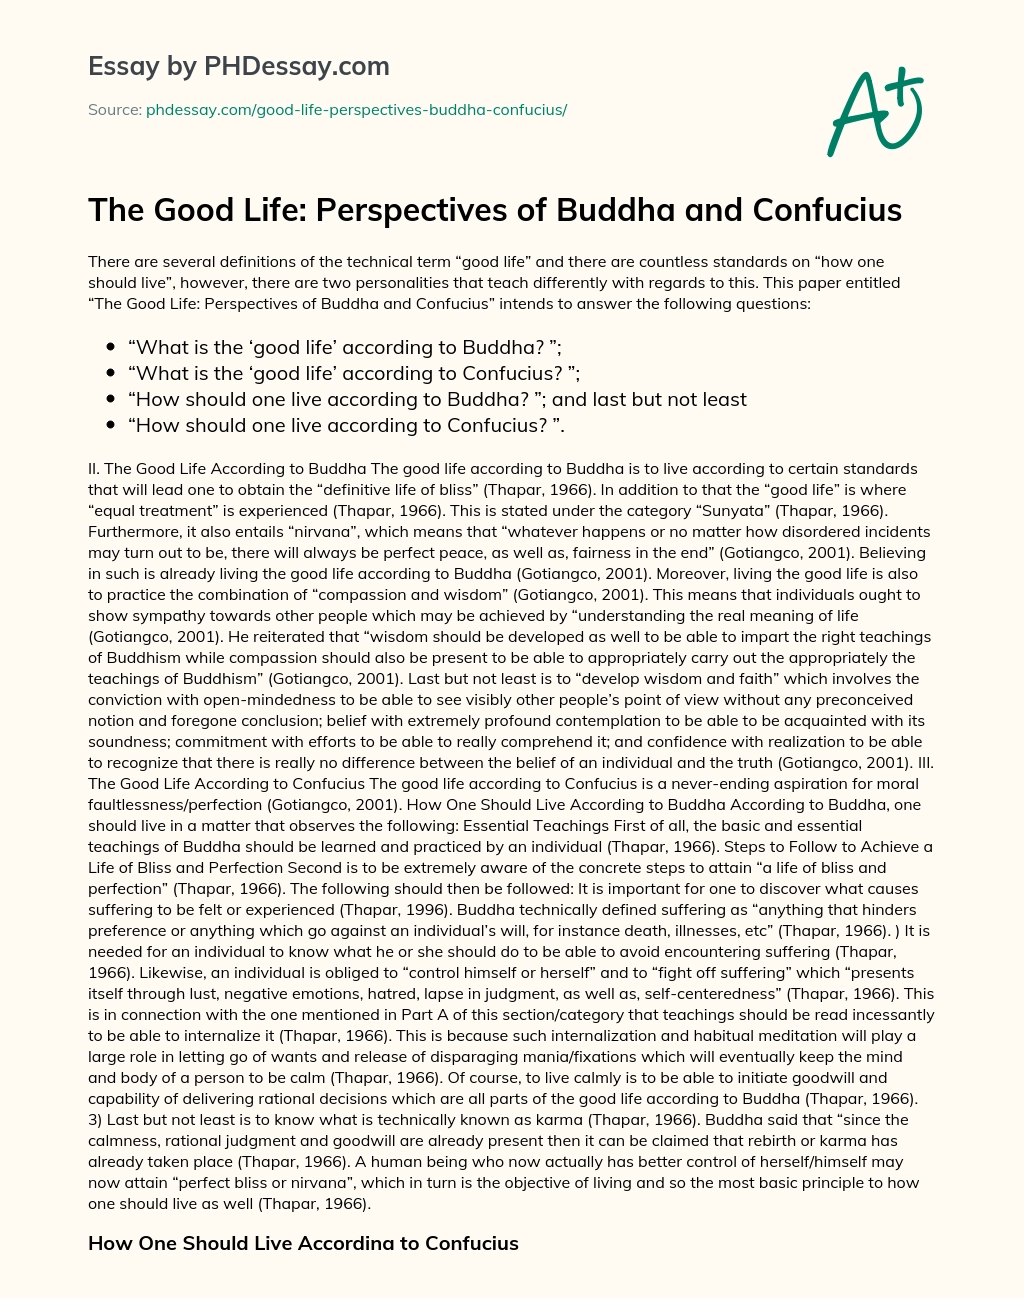 The Good Life: Perspectives of Buddha and Confucius essay